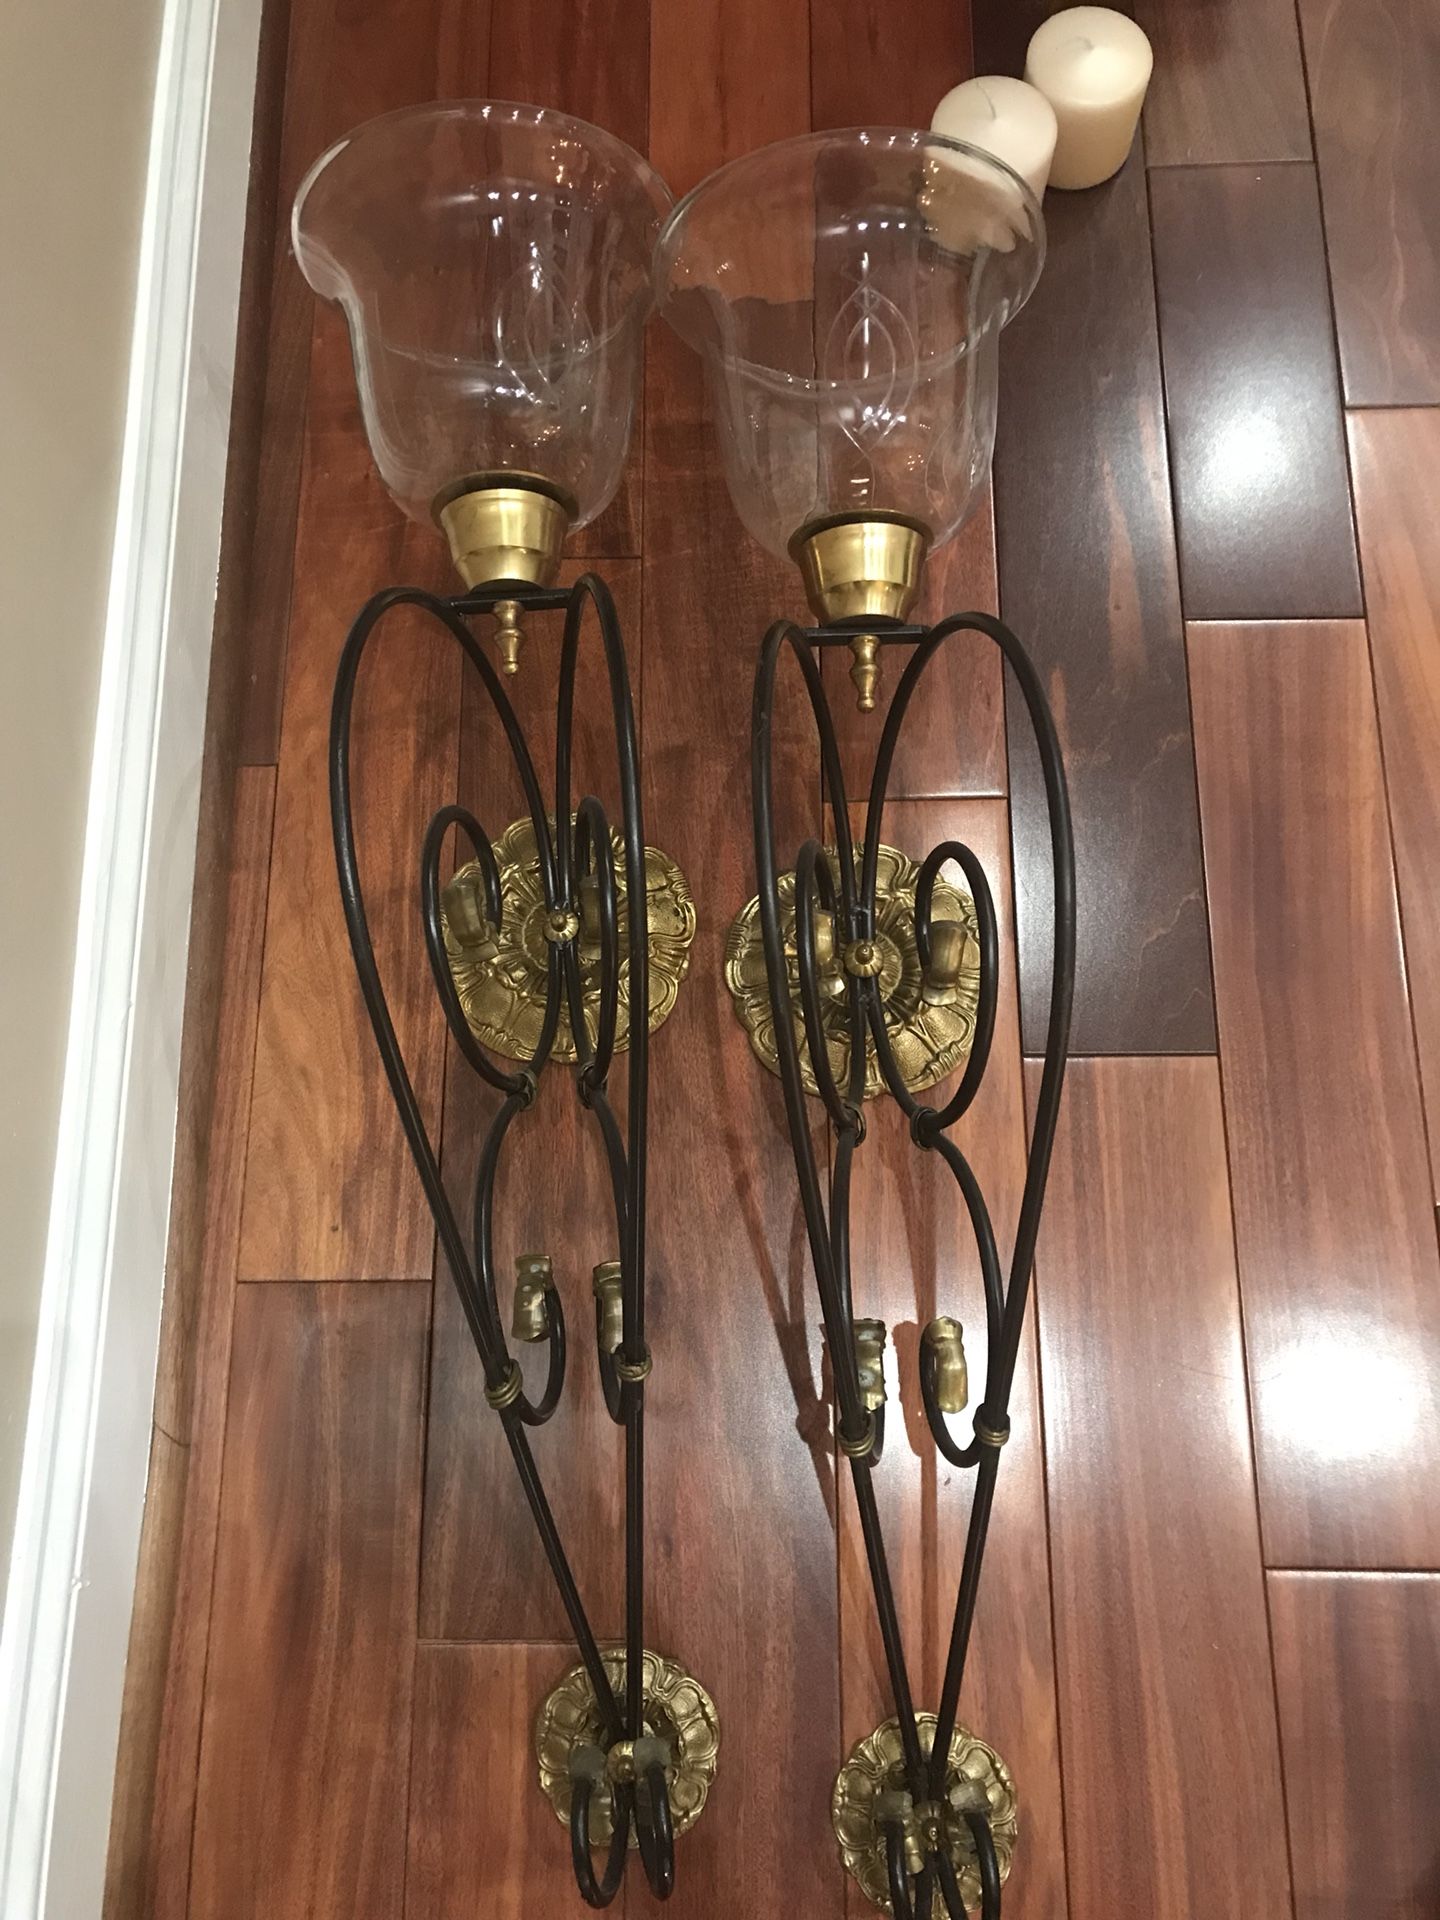 2 Large wall candle stands